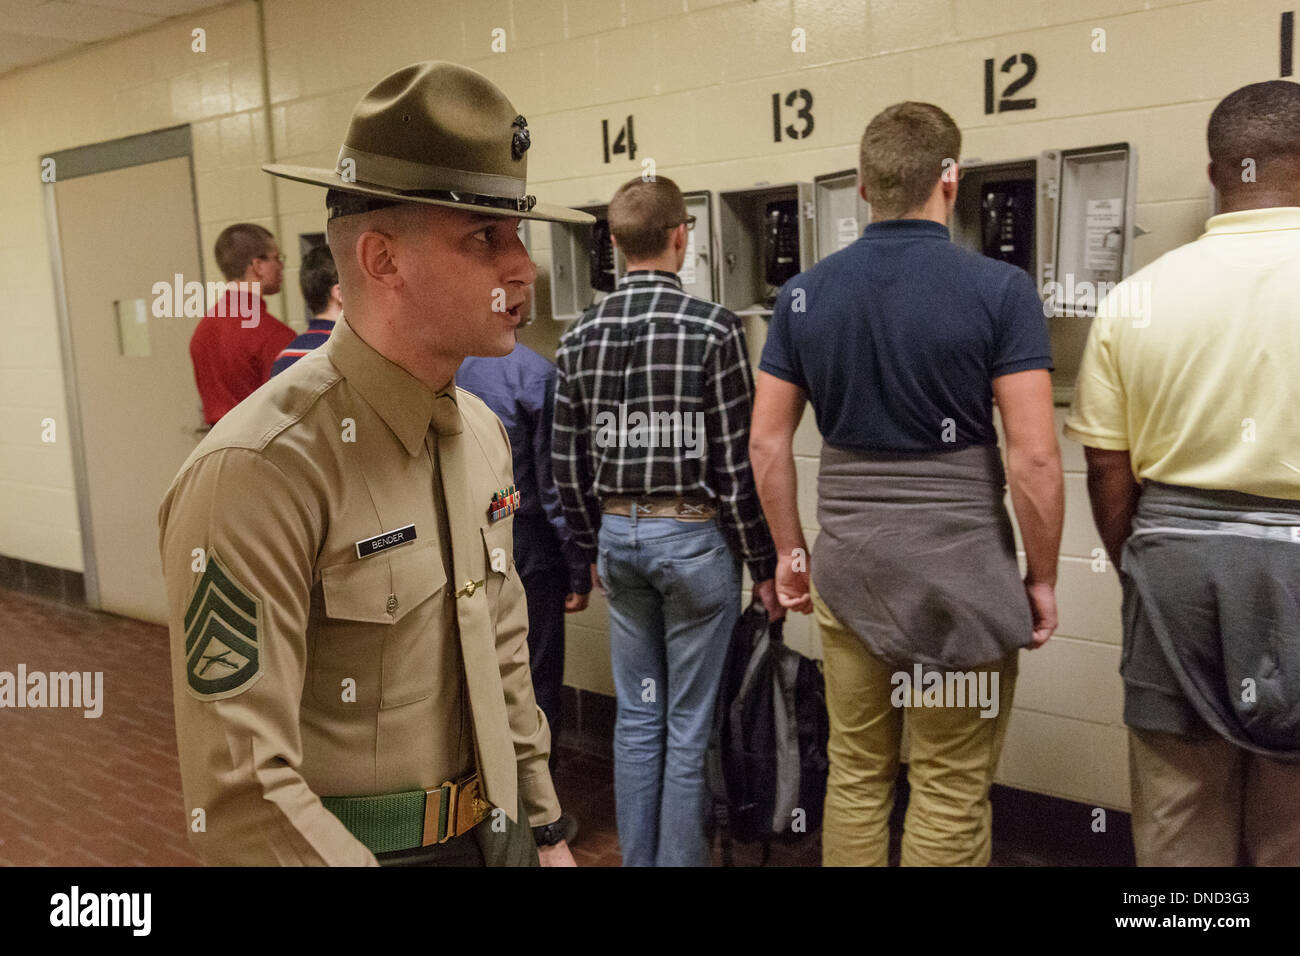 US Marine Corps Drill Instructors direct newly arrived recruits through the last call home during receiving at Marine Corps Recruit Depot Parris Island to begin 13 weeks of boot camp December 9, 2013 in Port Royal, South Carolina. The Marines train about 17,000 recruits at Parris Island yearly. Stock Photo